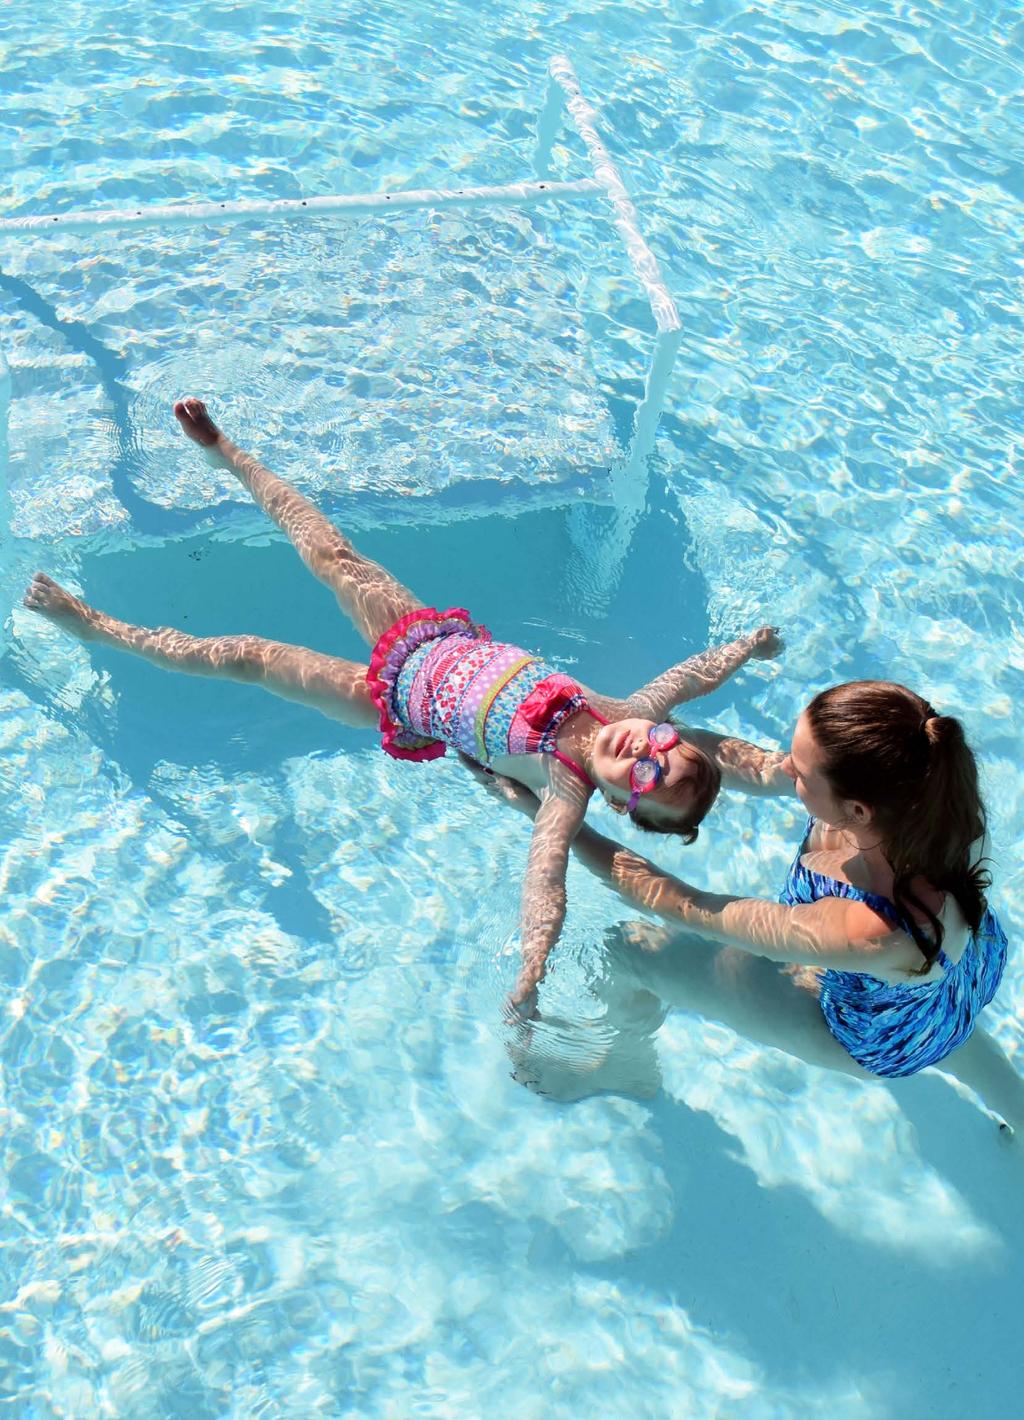 The J Swim School Promise We will staff knowledgeable, caring and fun instructors.